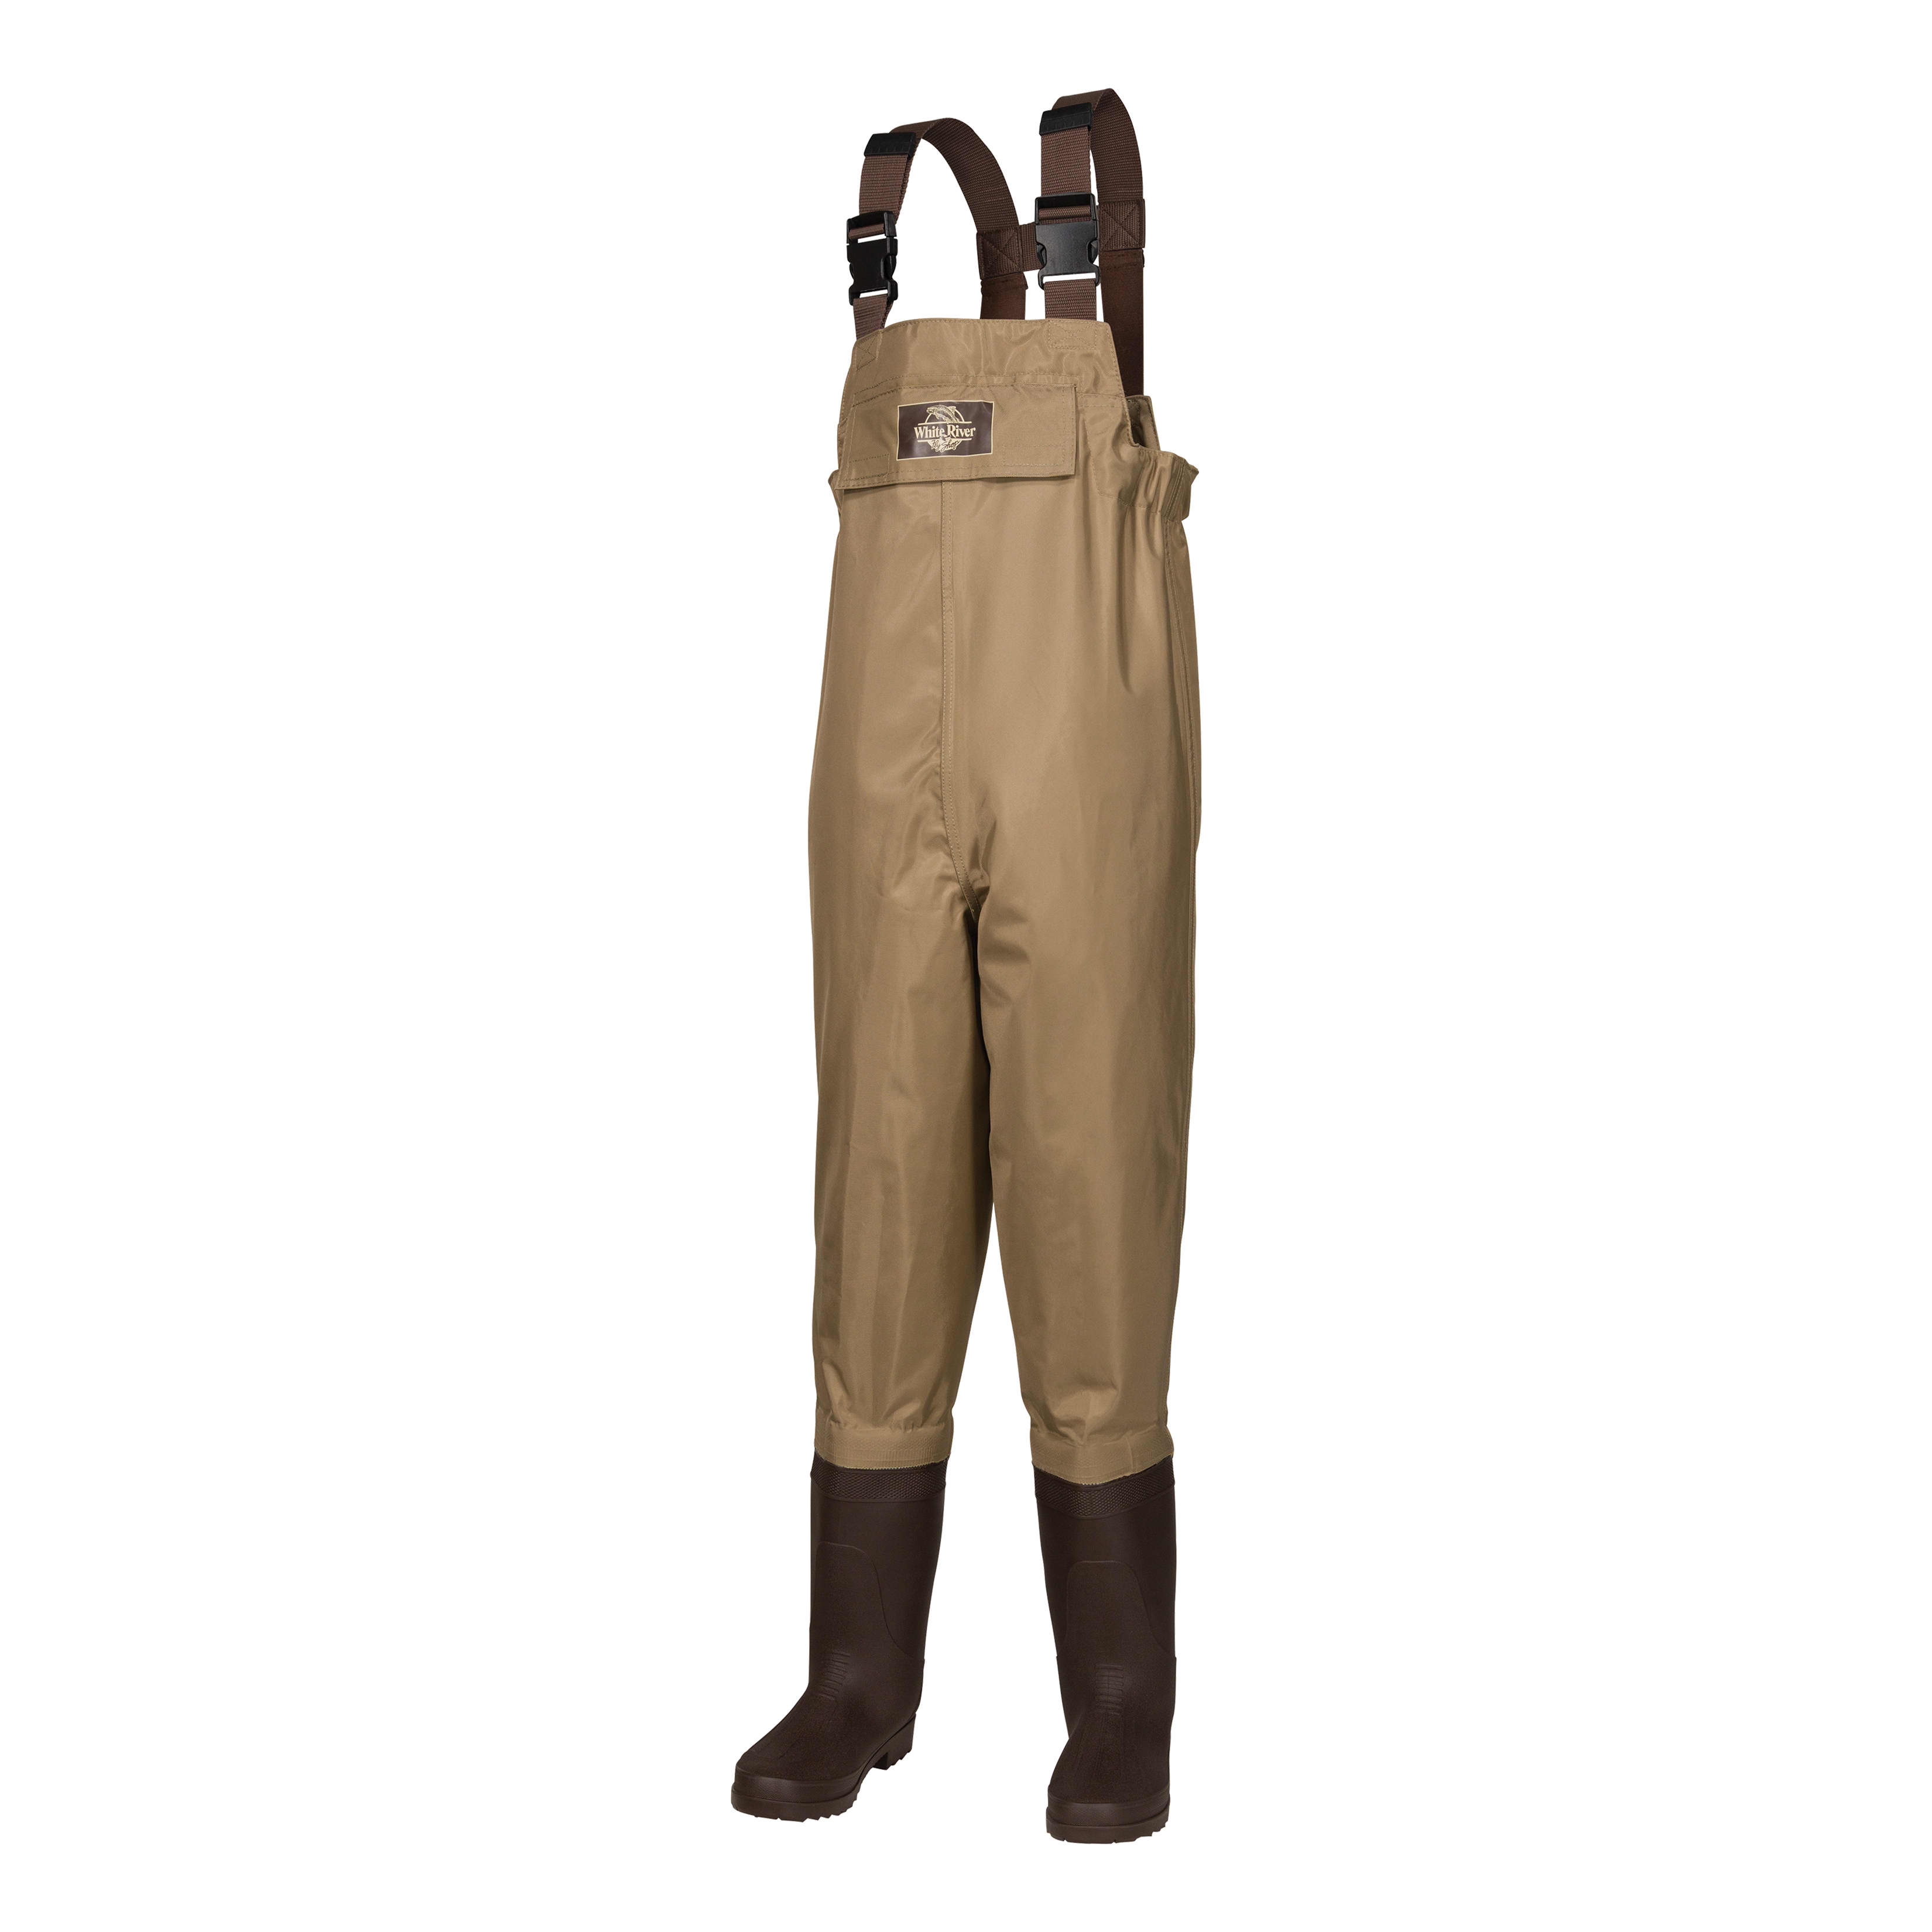 Kids Waders - The Best Youth Waders - Fly Fishing Field Guides